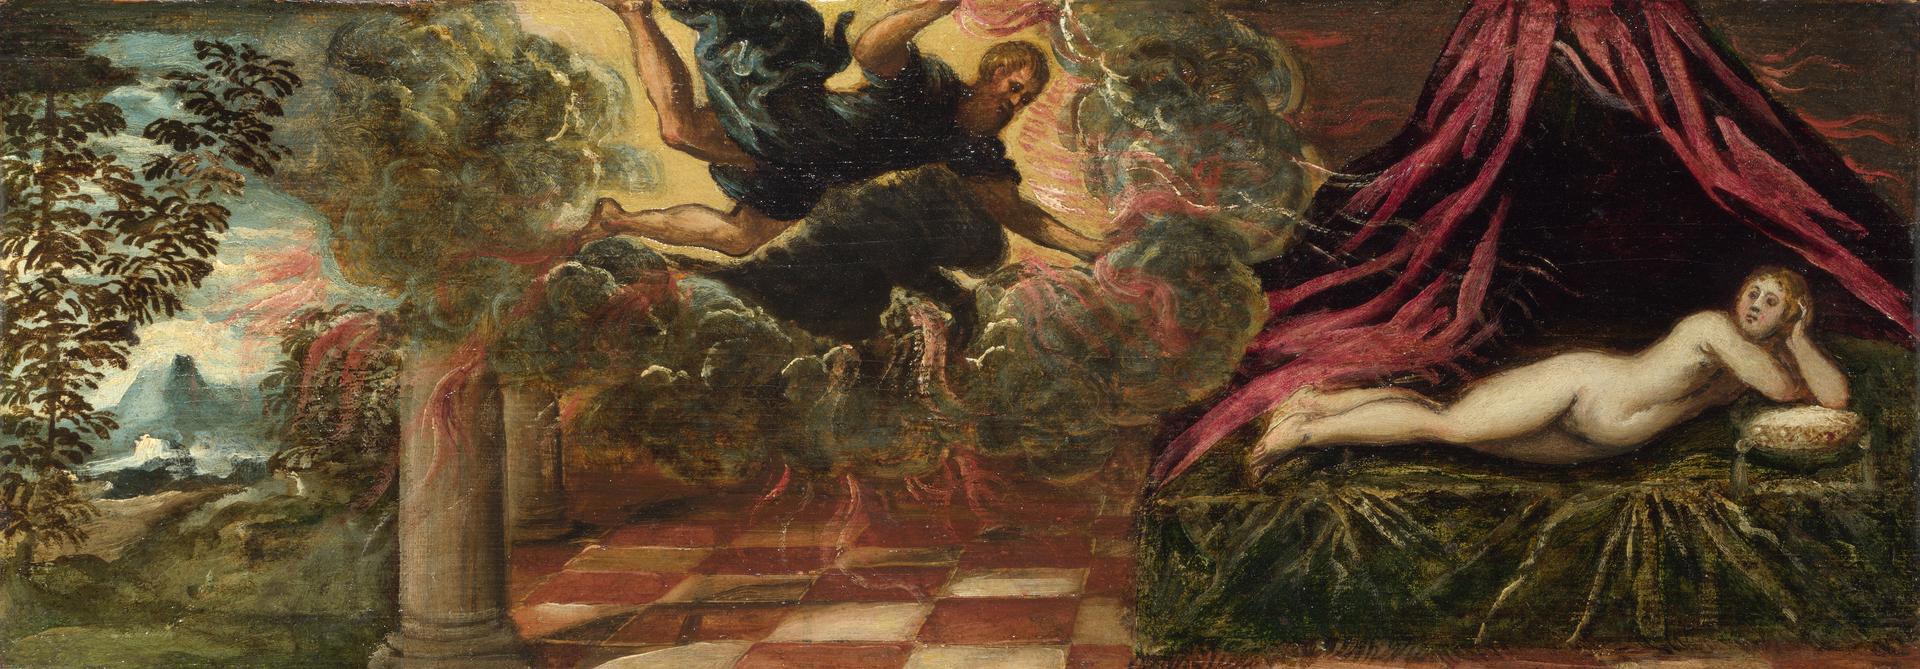 Jupiter and Semele by Possibly by Jacopo Tintoretto